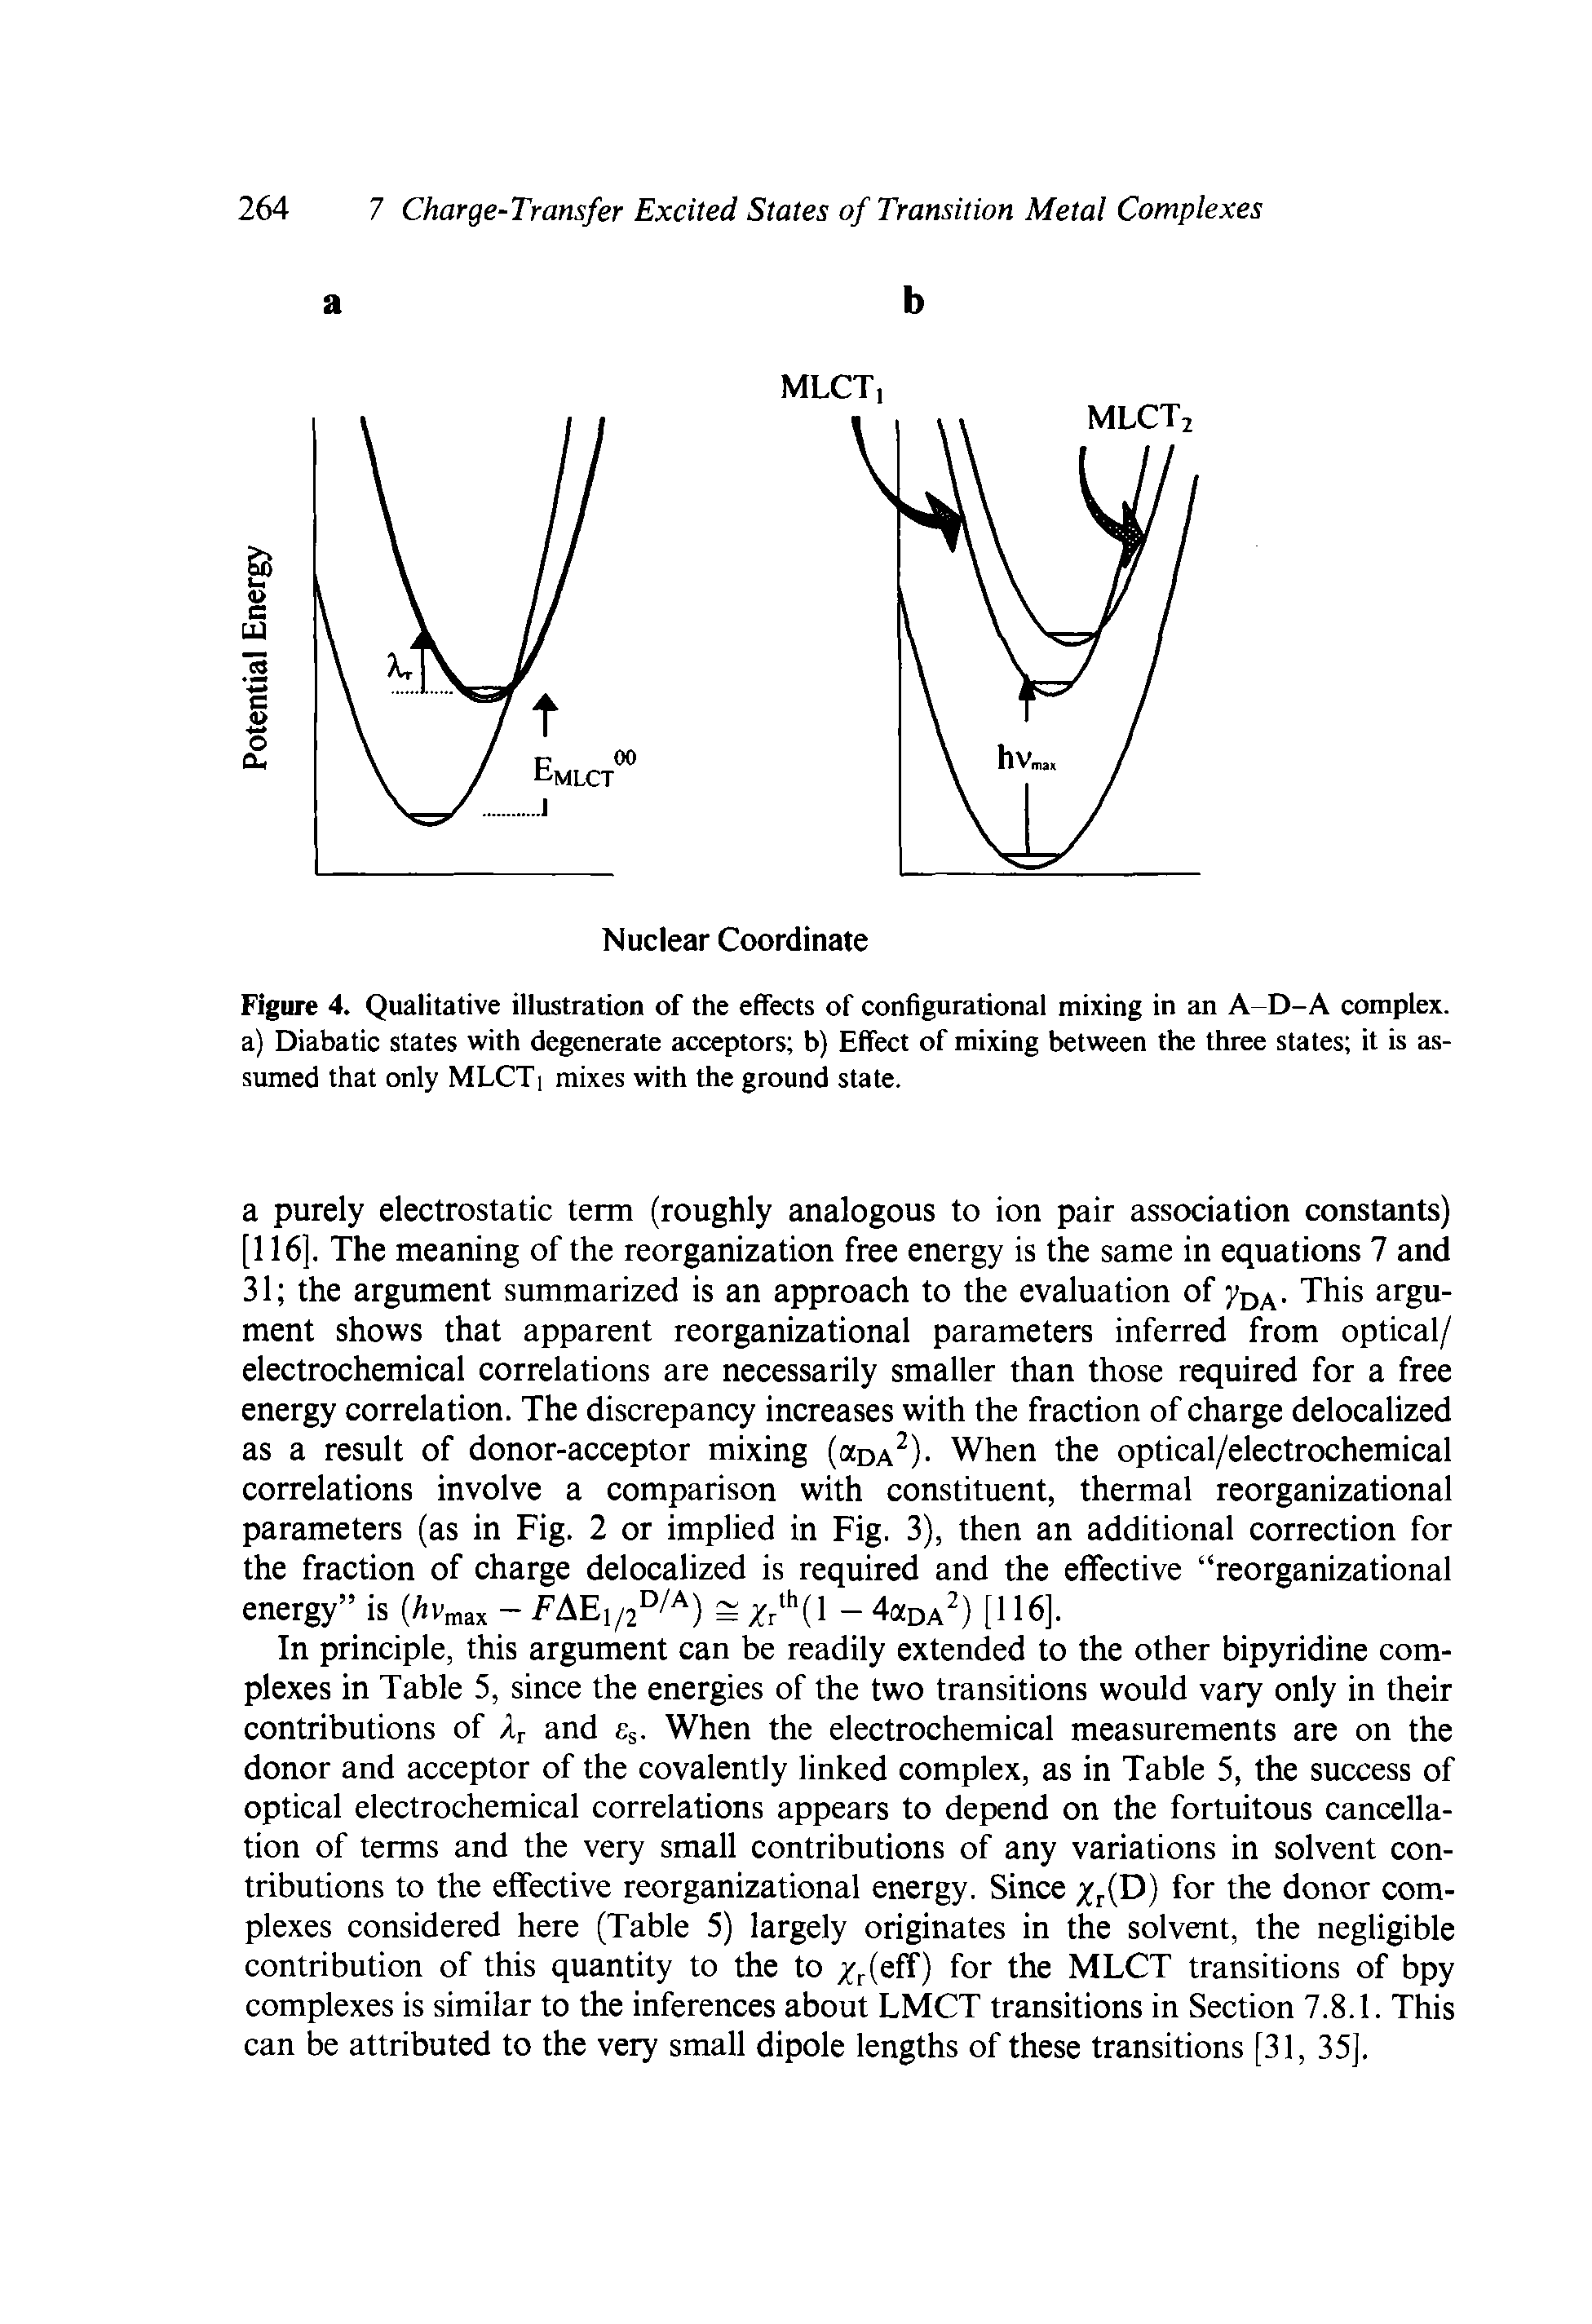 Figure 4. Qualitative illustration of the effects of configurational mixing in an A D-A complex, a) Diabatic states with degenerate acceptors b) Effect of mixing between the three states it is assumed that only MLCTi mixes with the ground state.